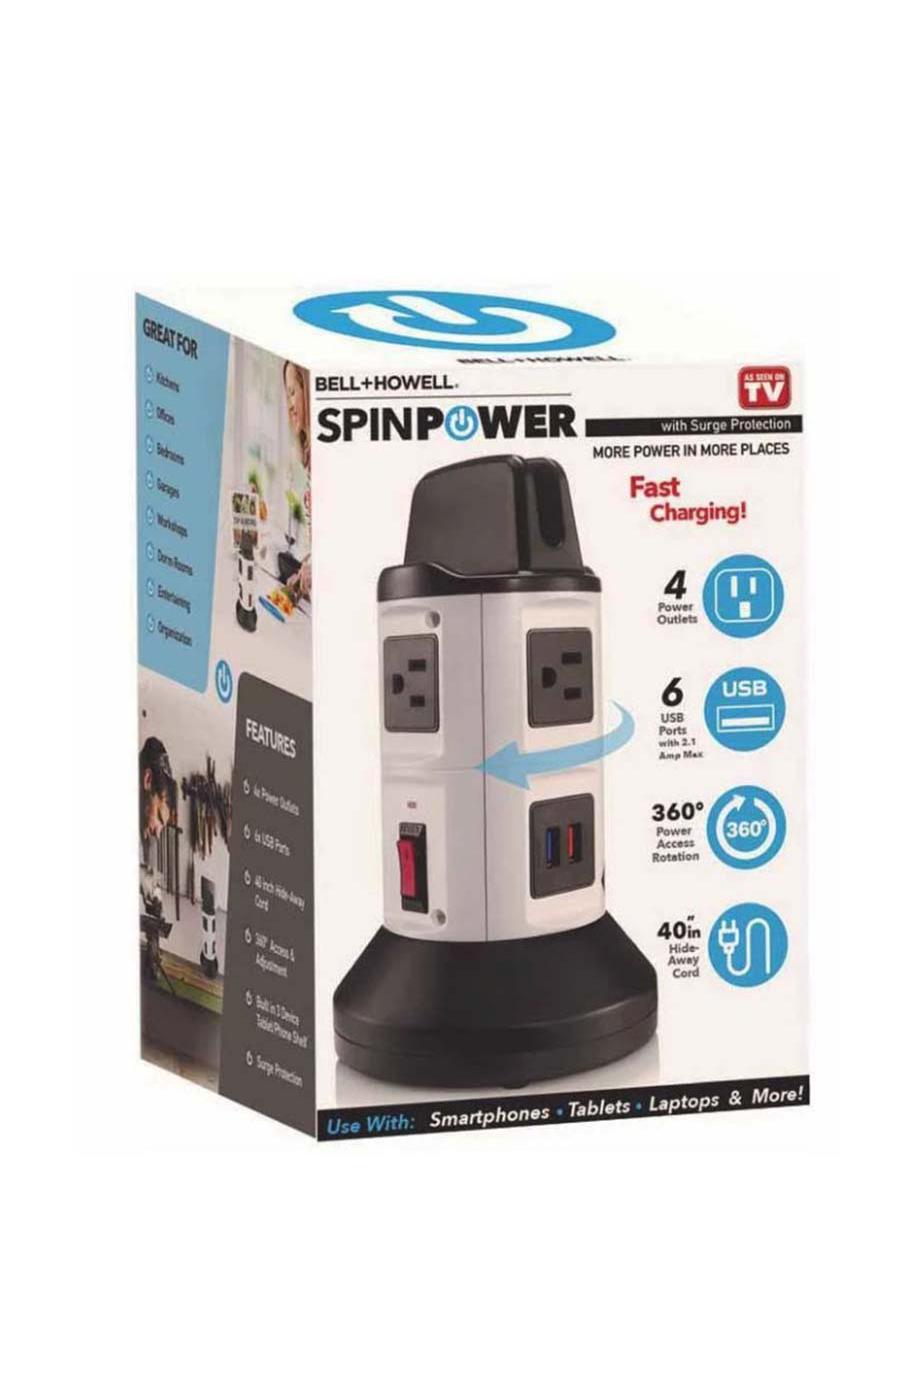 Bell + Howell Spin Power Charging Station with Surge Protectin; image 1 of 3